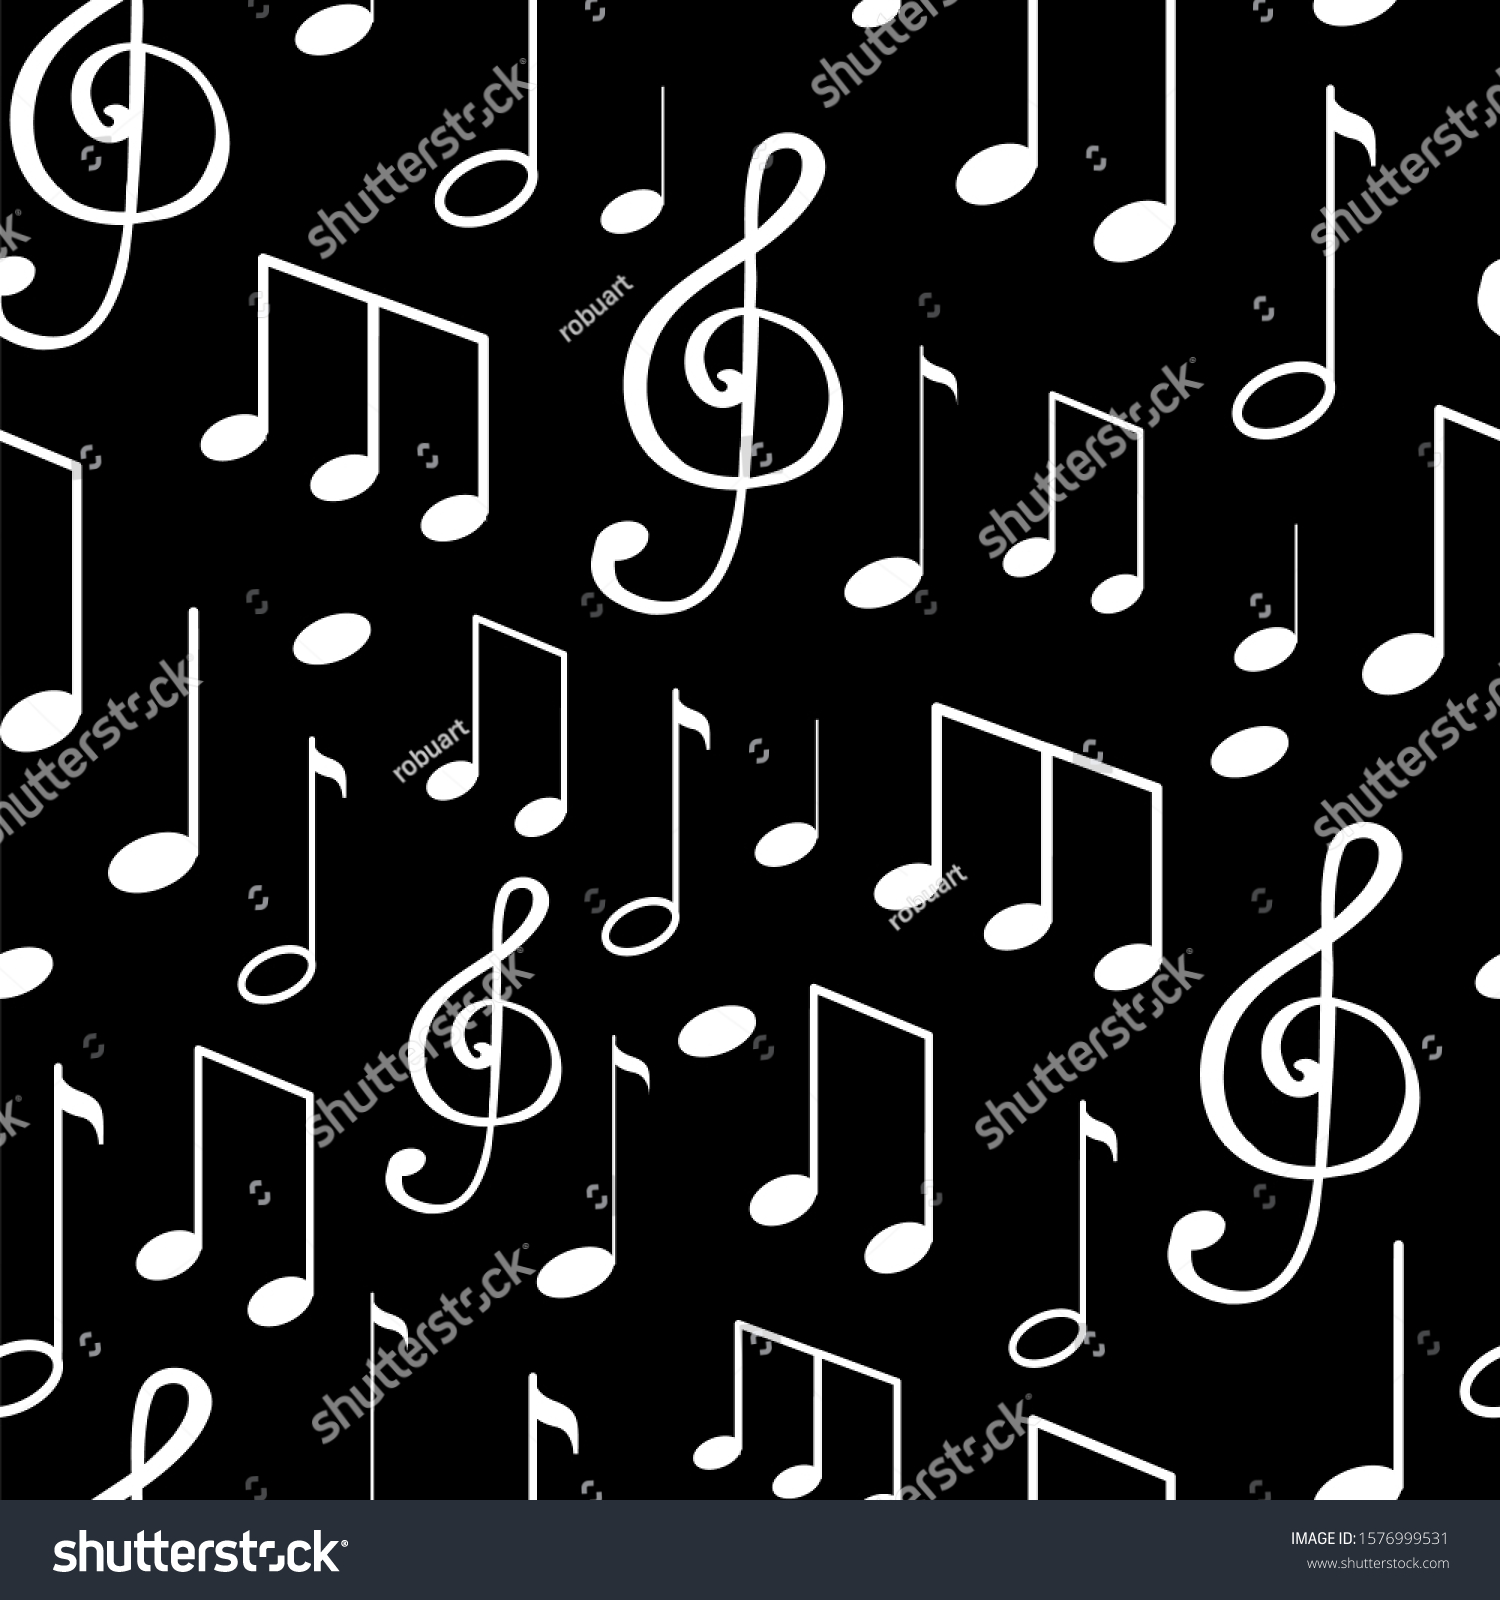 Music Notes Notation Sketches Seamless Pattern Stock Illustration ...